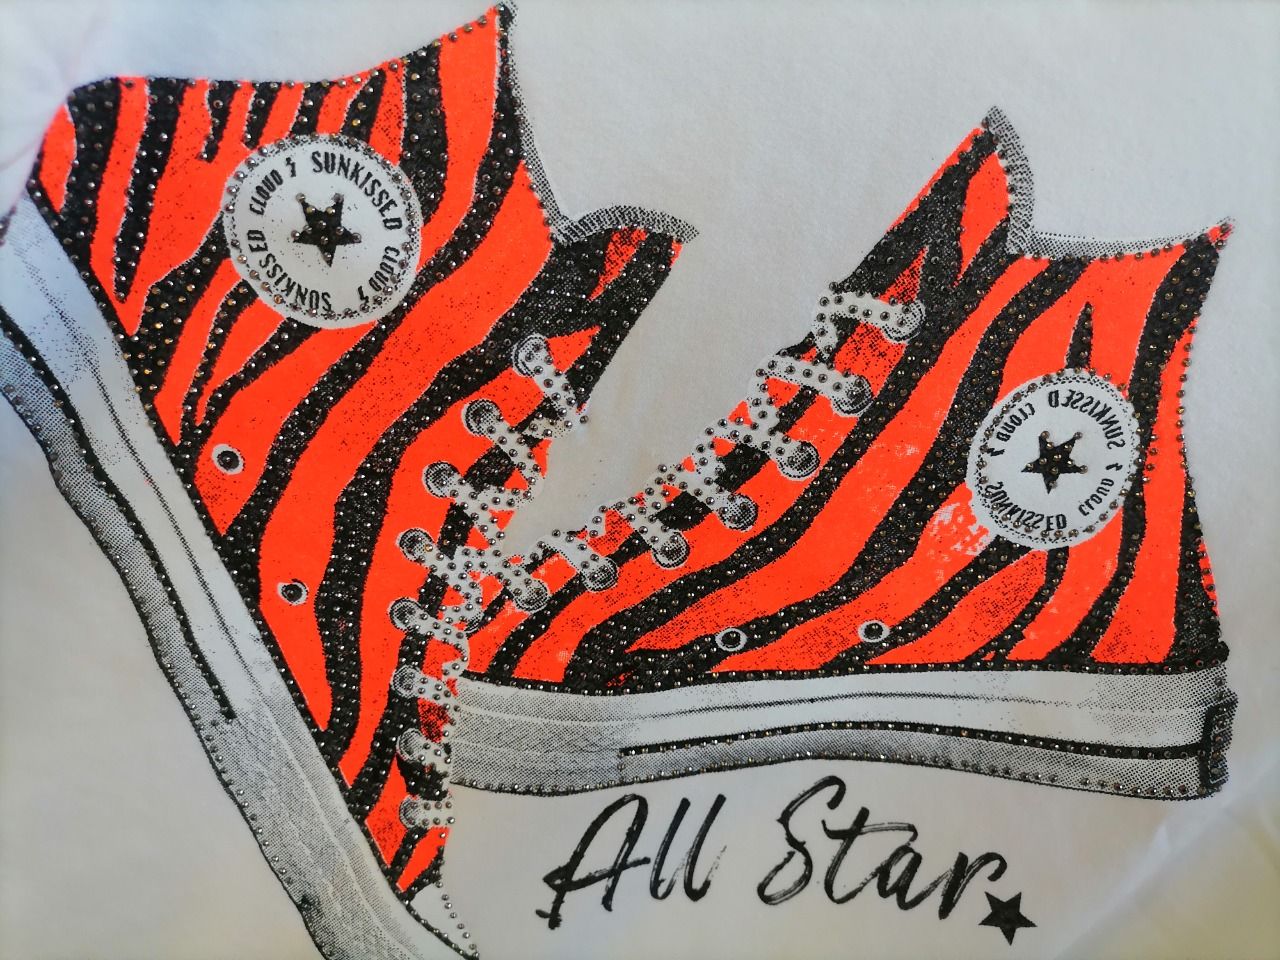 Top All Star +